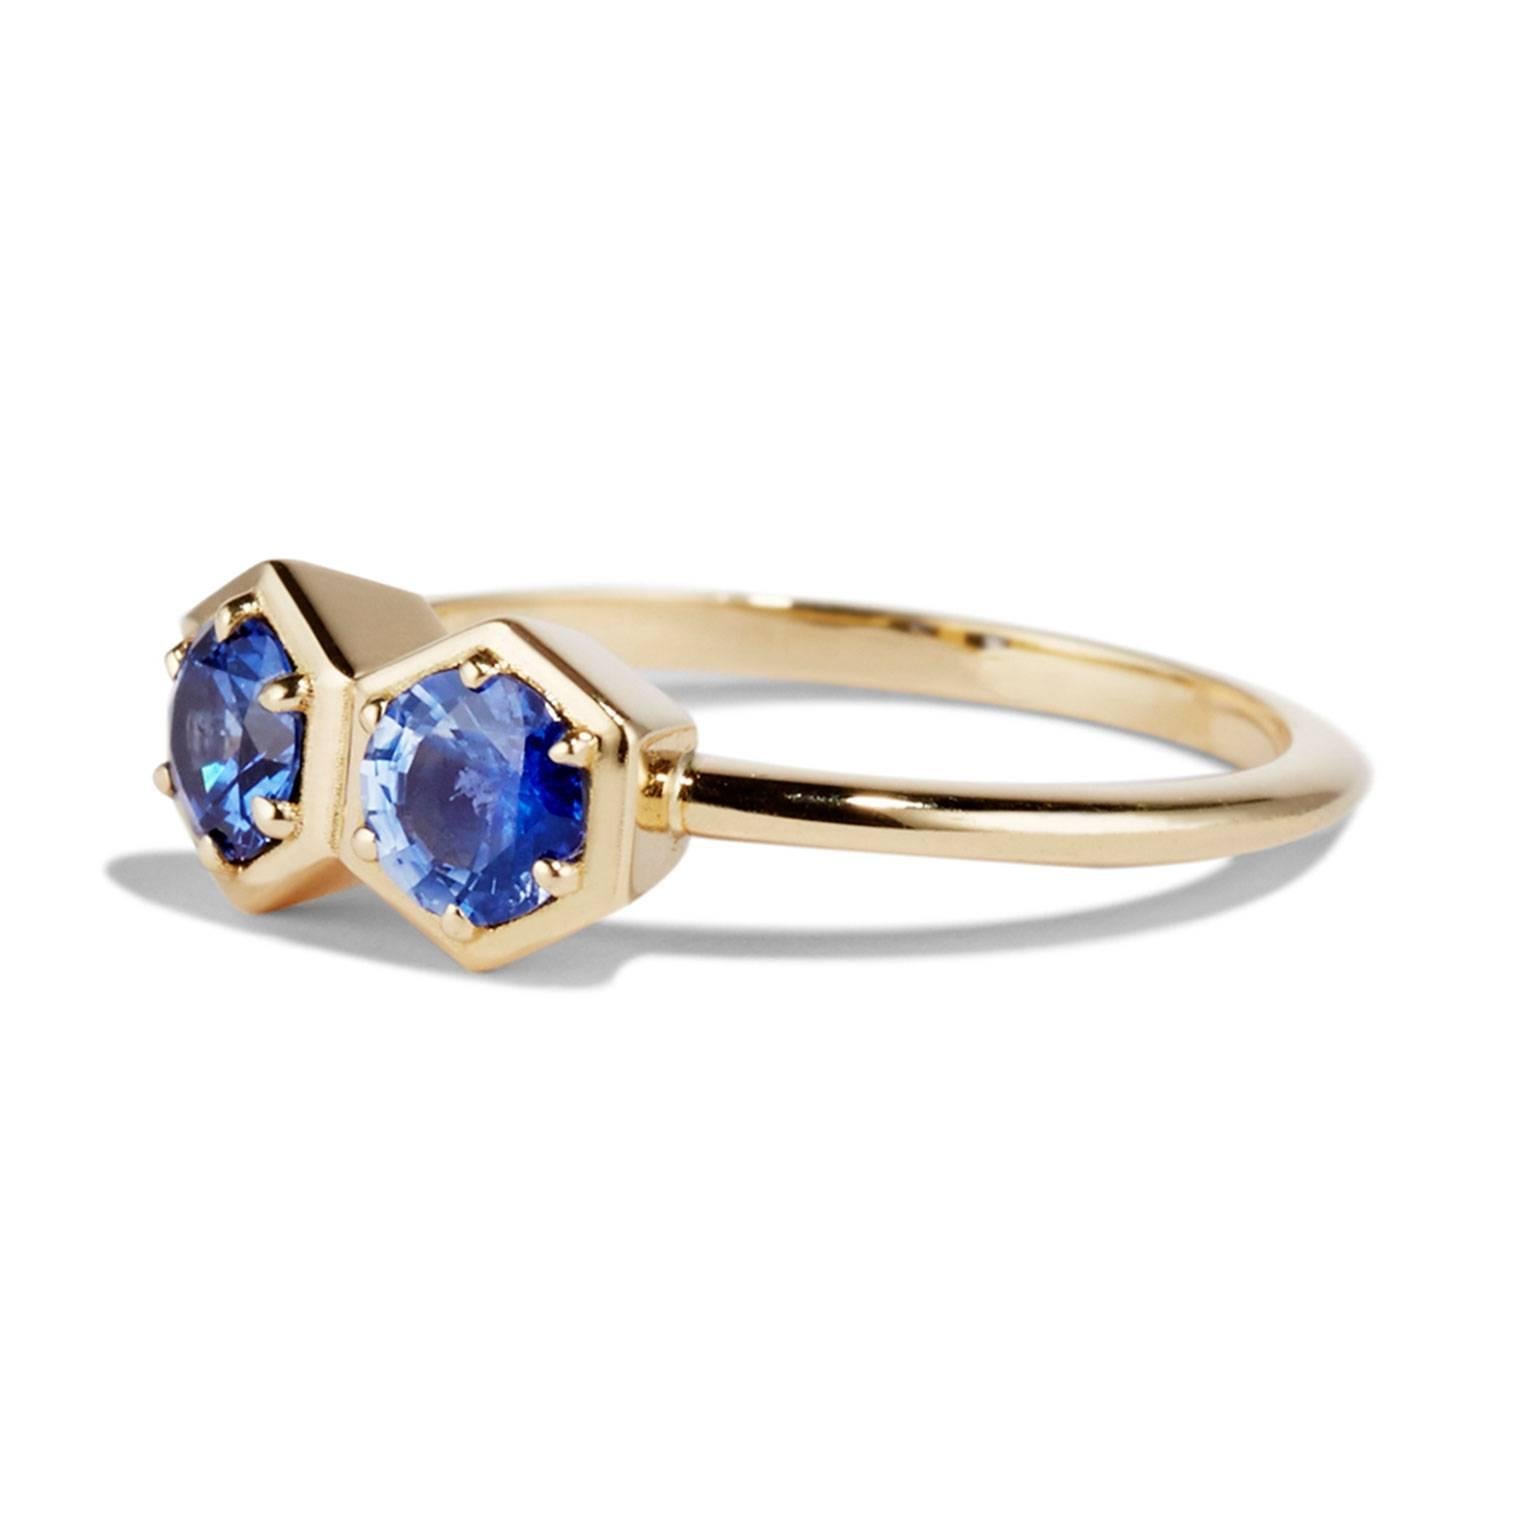 A pair of sapphires sparkle when cut in an interesting way and placed alongside each other to create a mirror effect. The DOUBLE HEX ring is made in 18 carat gold holding a pair of sapphires.

All of our designs can be modified to meet a range of